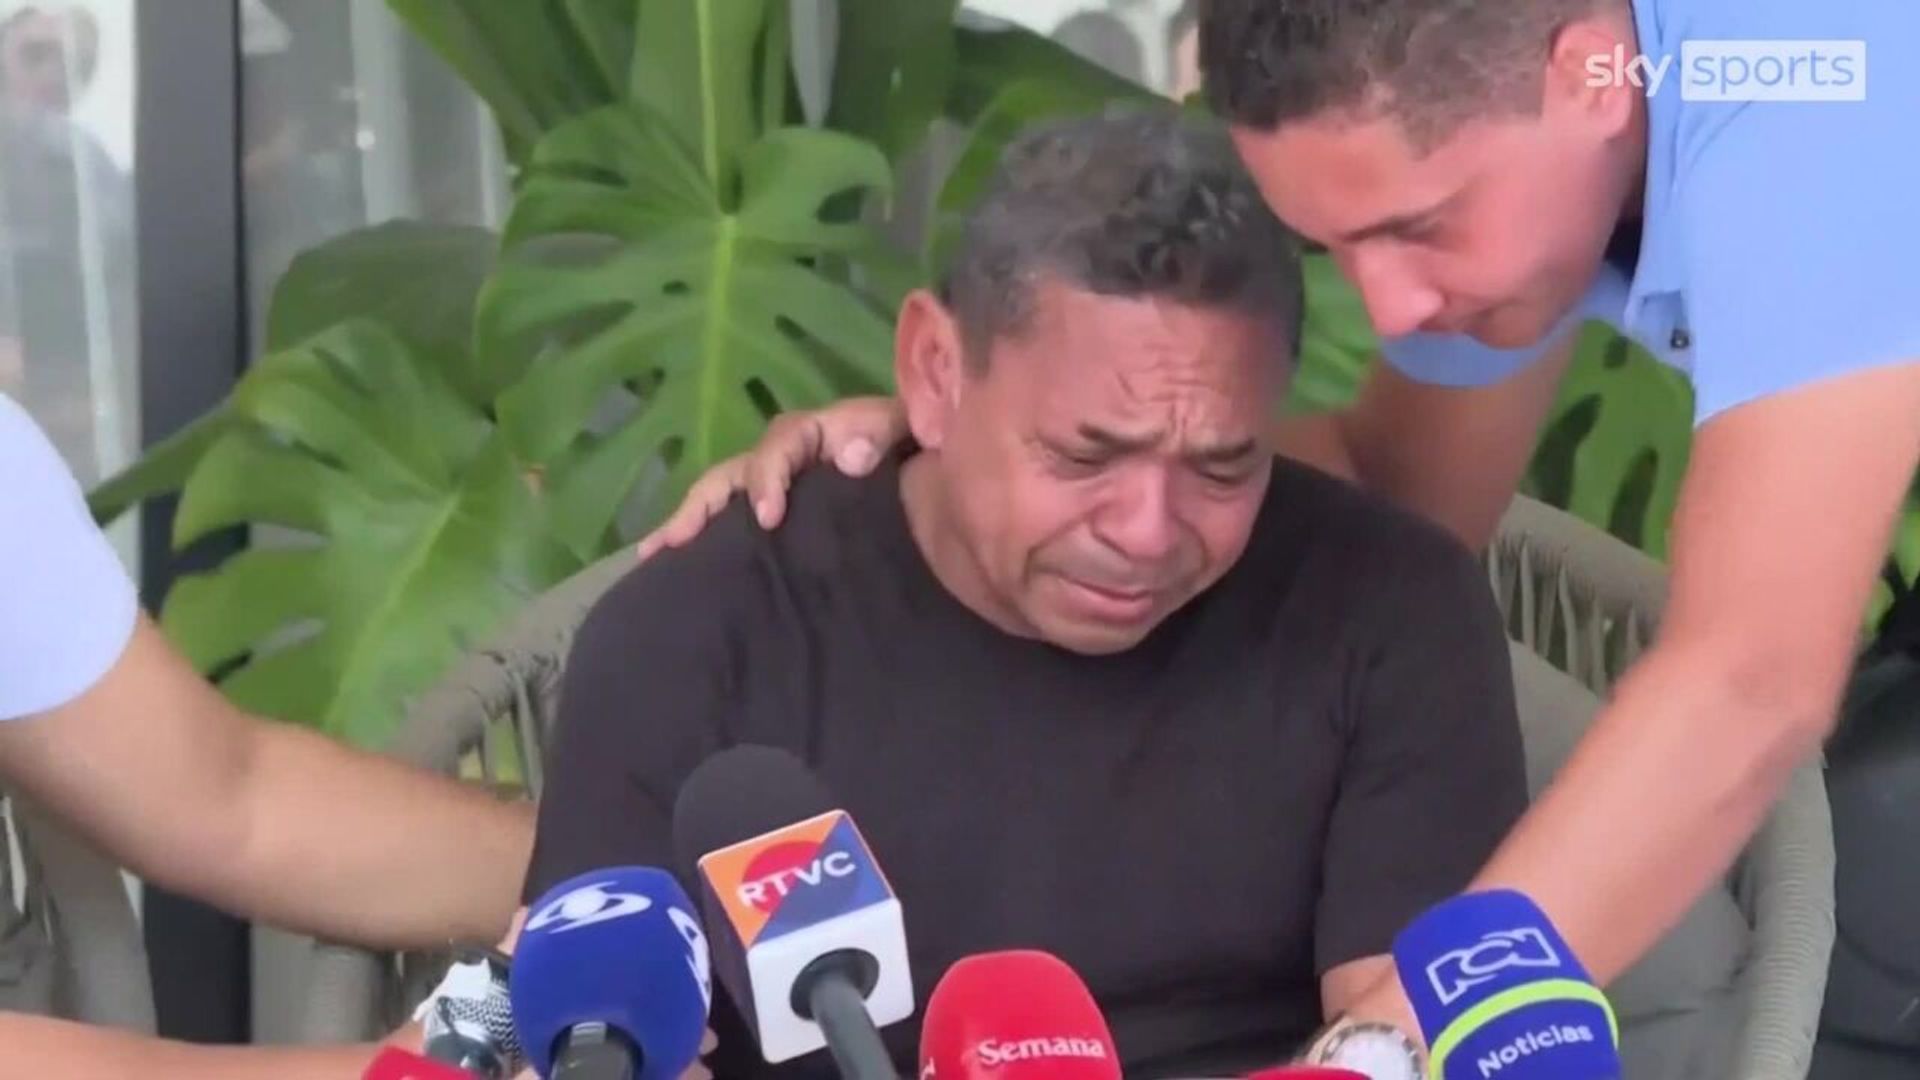 'Thank God I am here' - Diaz’s father in tears after release